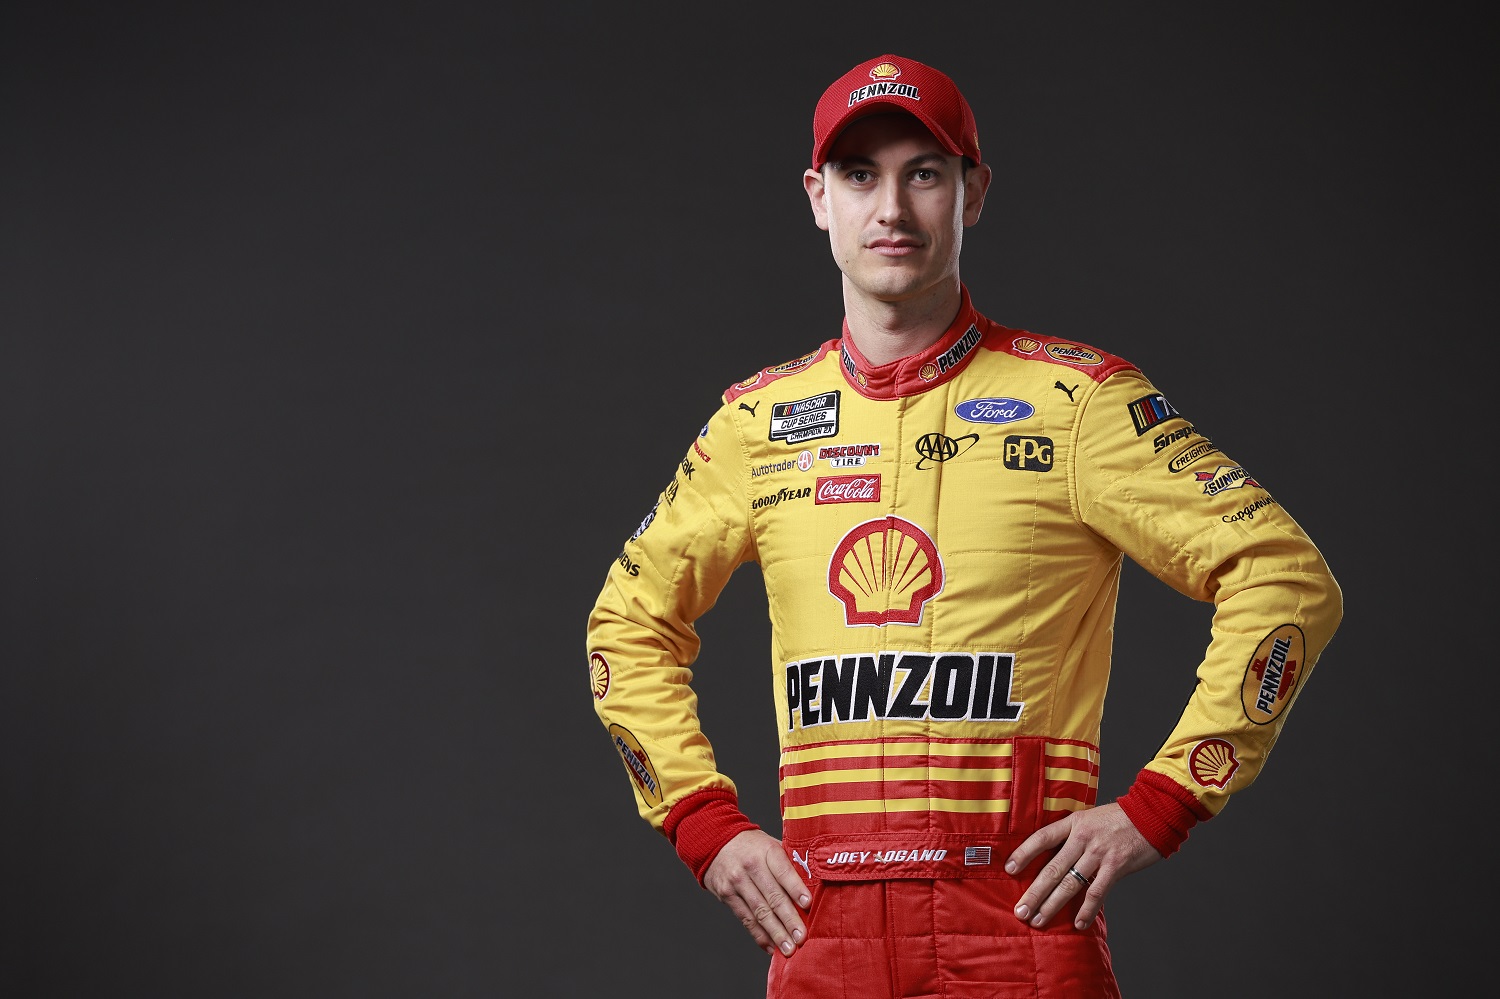 Joey Logano poses for a photo during NASCAR Production Days at Charlotte Convention Center on Jan. 17, 2023.